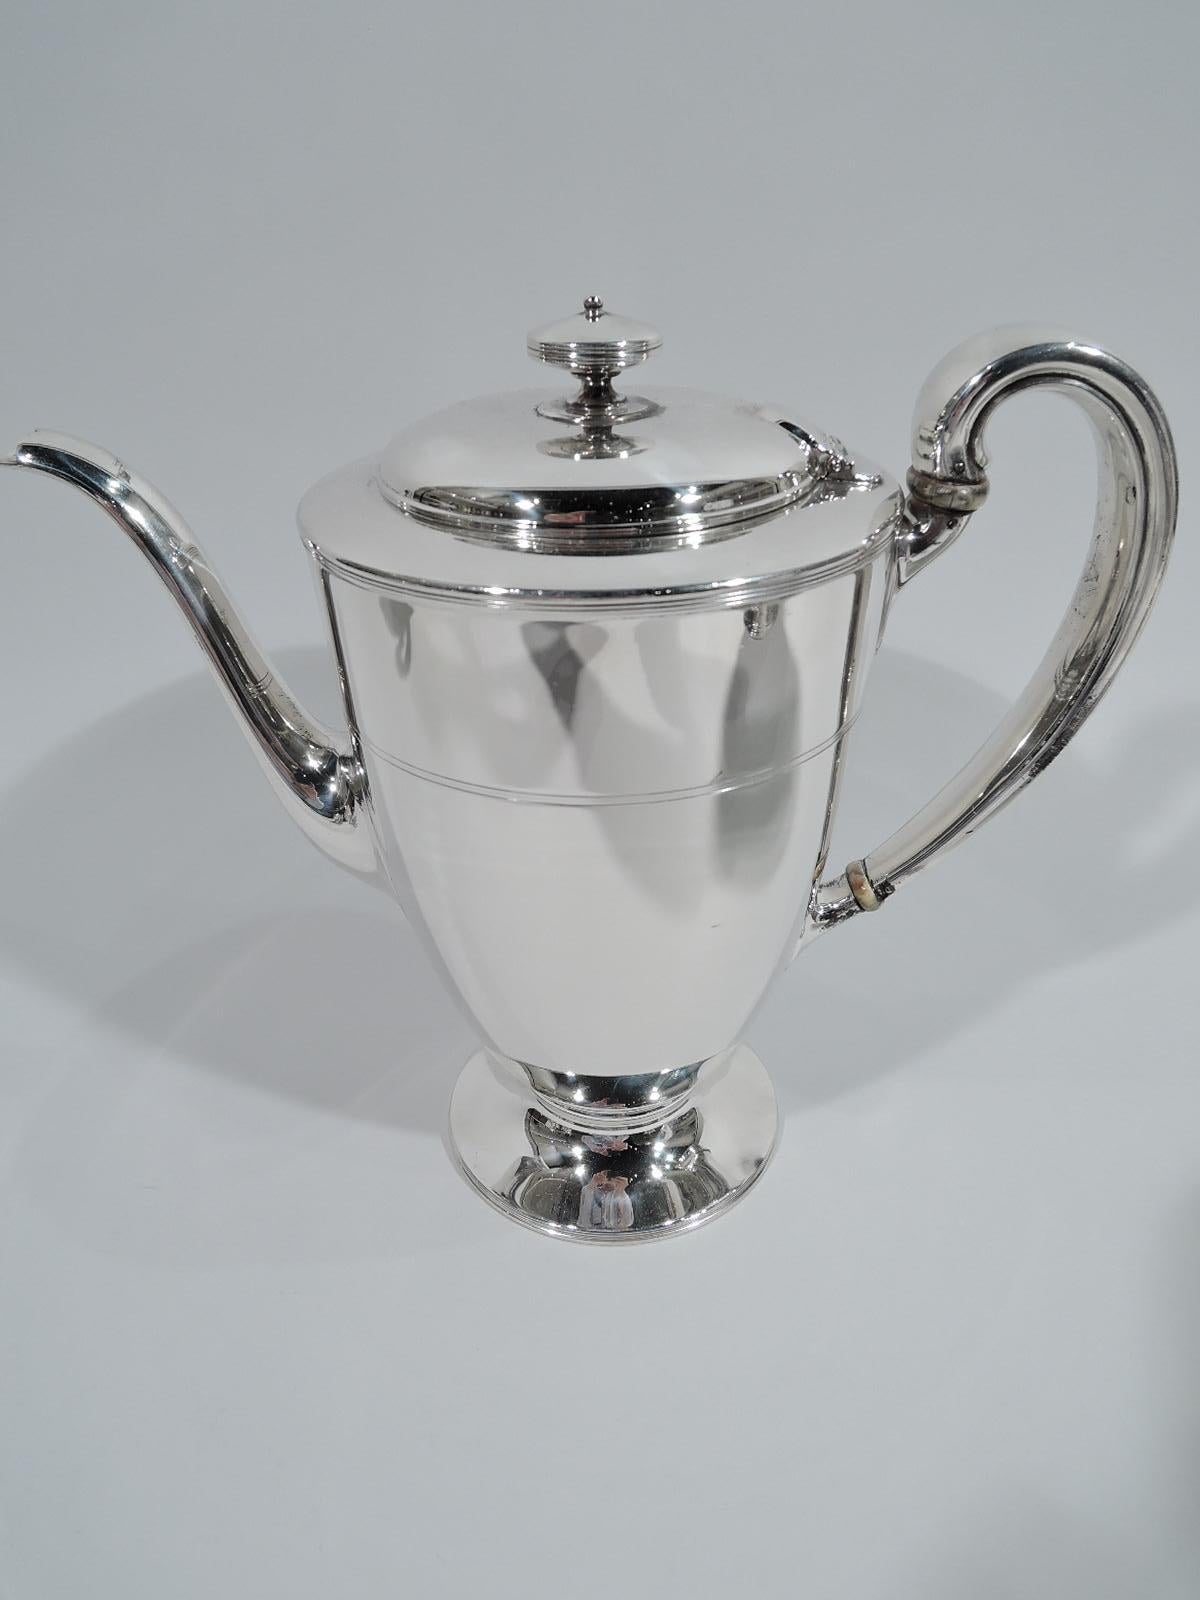 Edwardian Modern sterling silver coffee and tea set. Made by Tiffany & Co. in New York, ca 1907. This set comprises coffeepot, teapot, creamer, sugar, and waste bowl.

Each: Ovoid body with round and raised foot. Handles high looping except waste